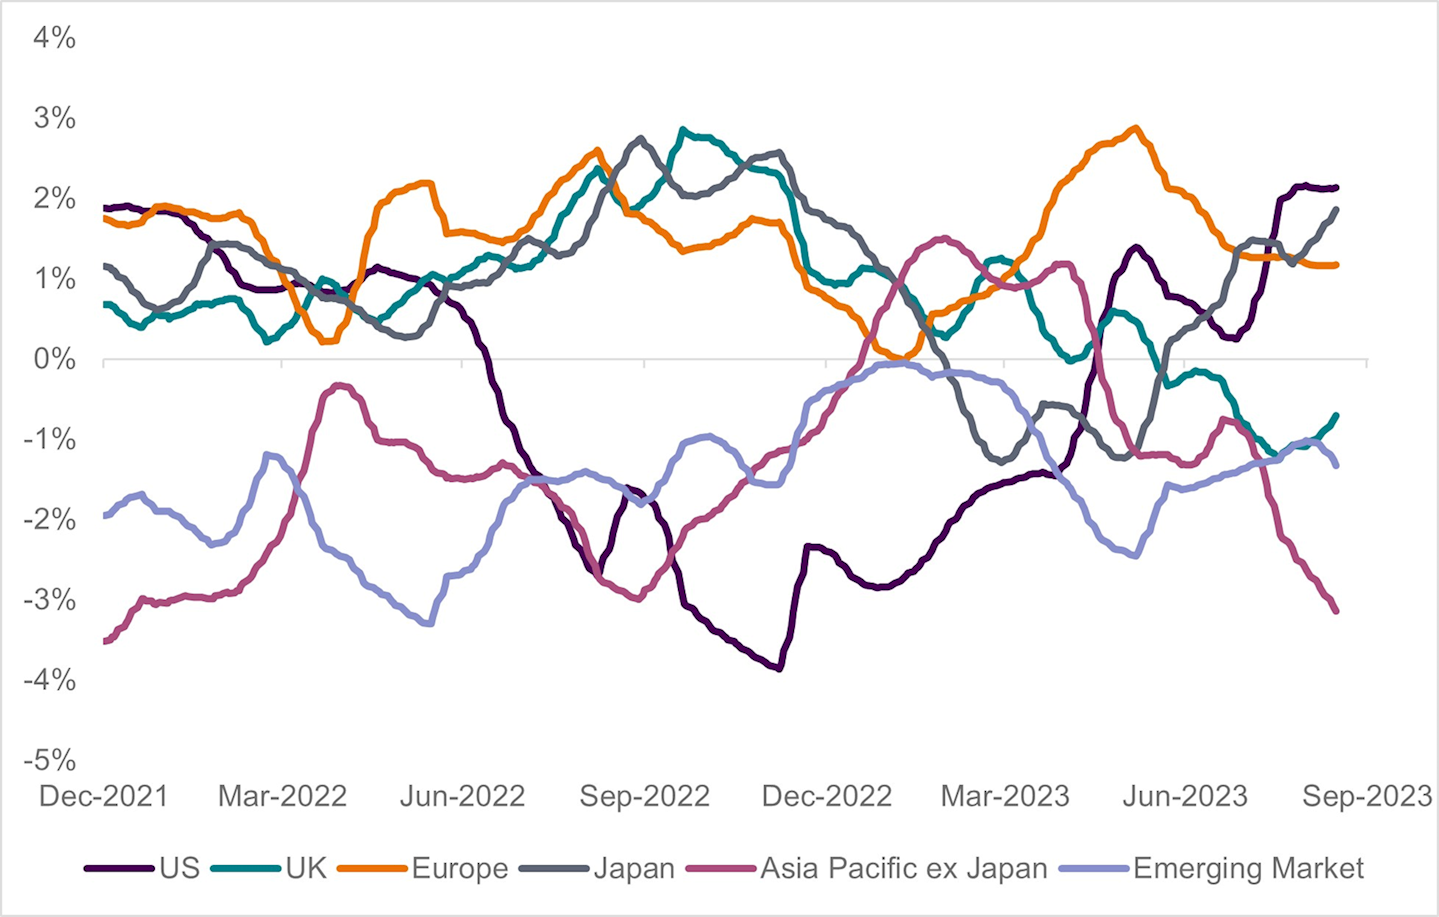 Chart 2: Royal London Asset Management Relative Earnings Revisions indices – Japan earnings picture looks strong